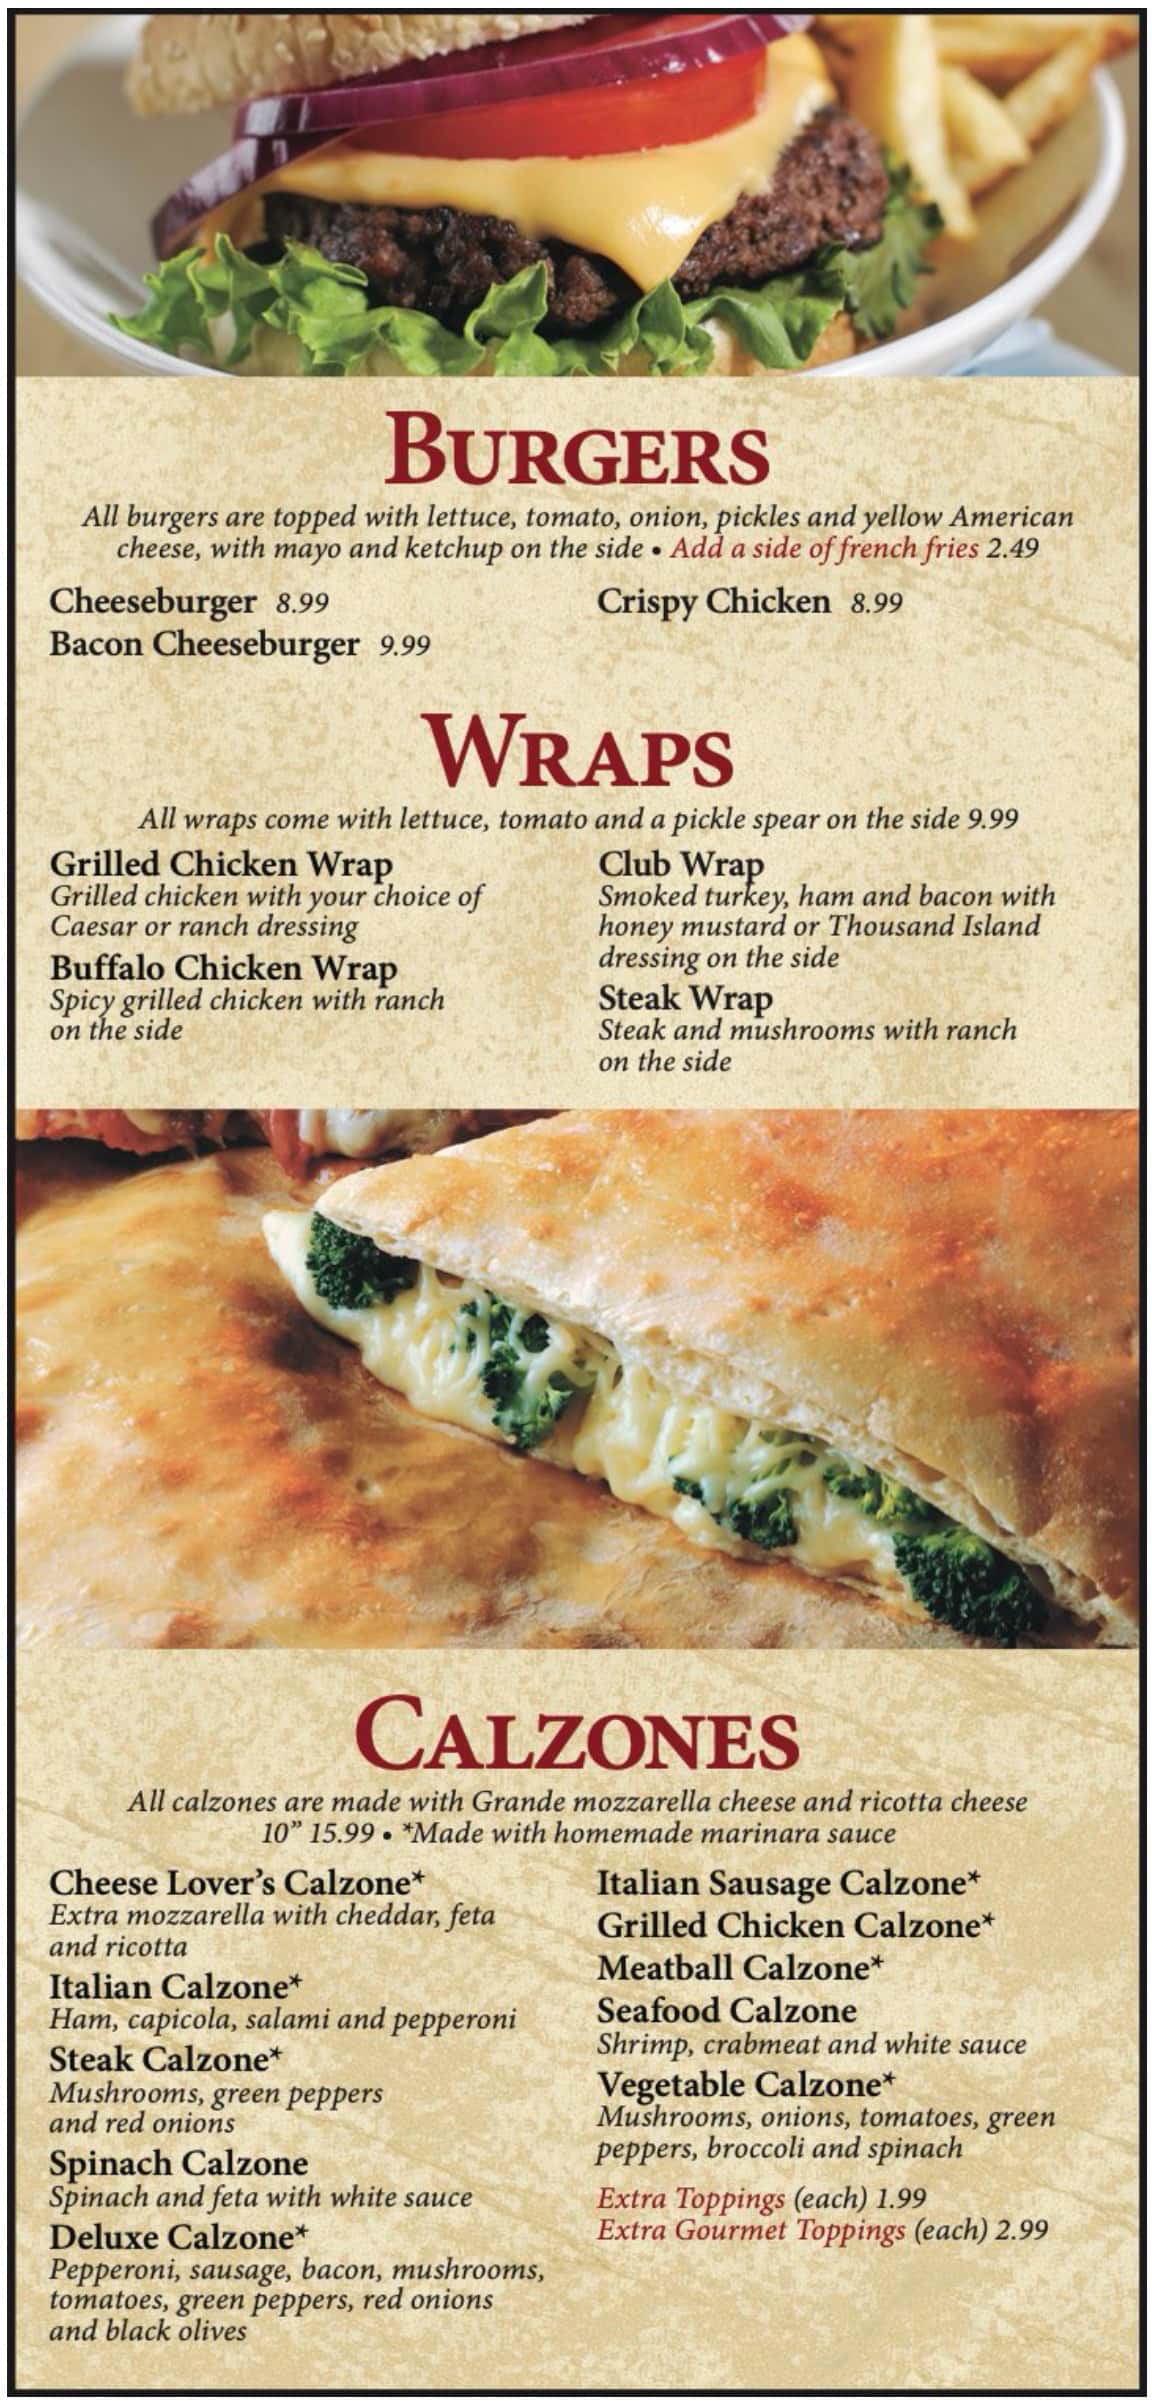 Pizza Palermo Burgers, Wraps, and Calzones Menu